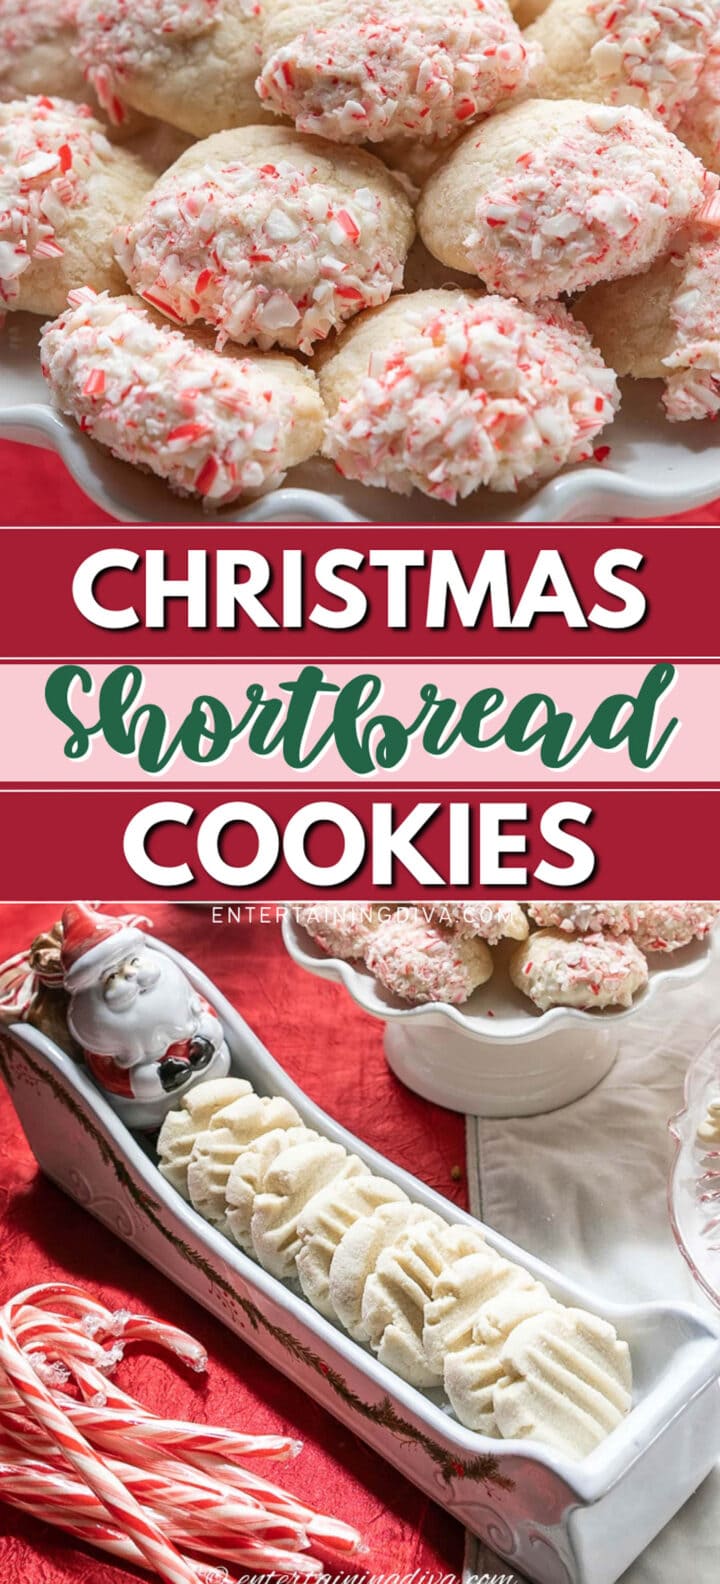 Whipped shortbread cookies on a plate with candy canes.